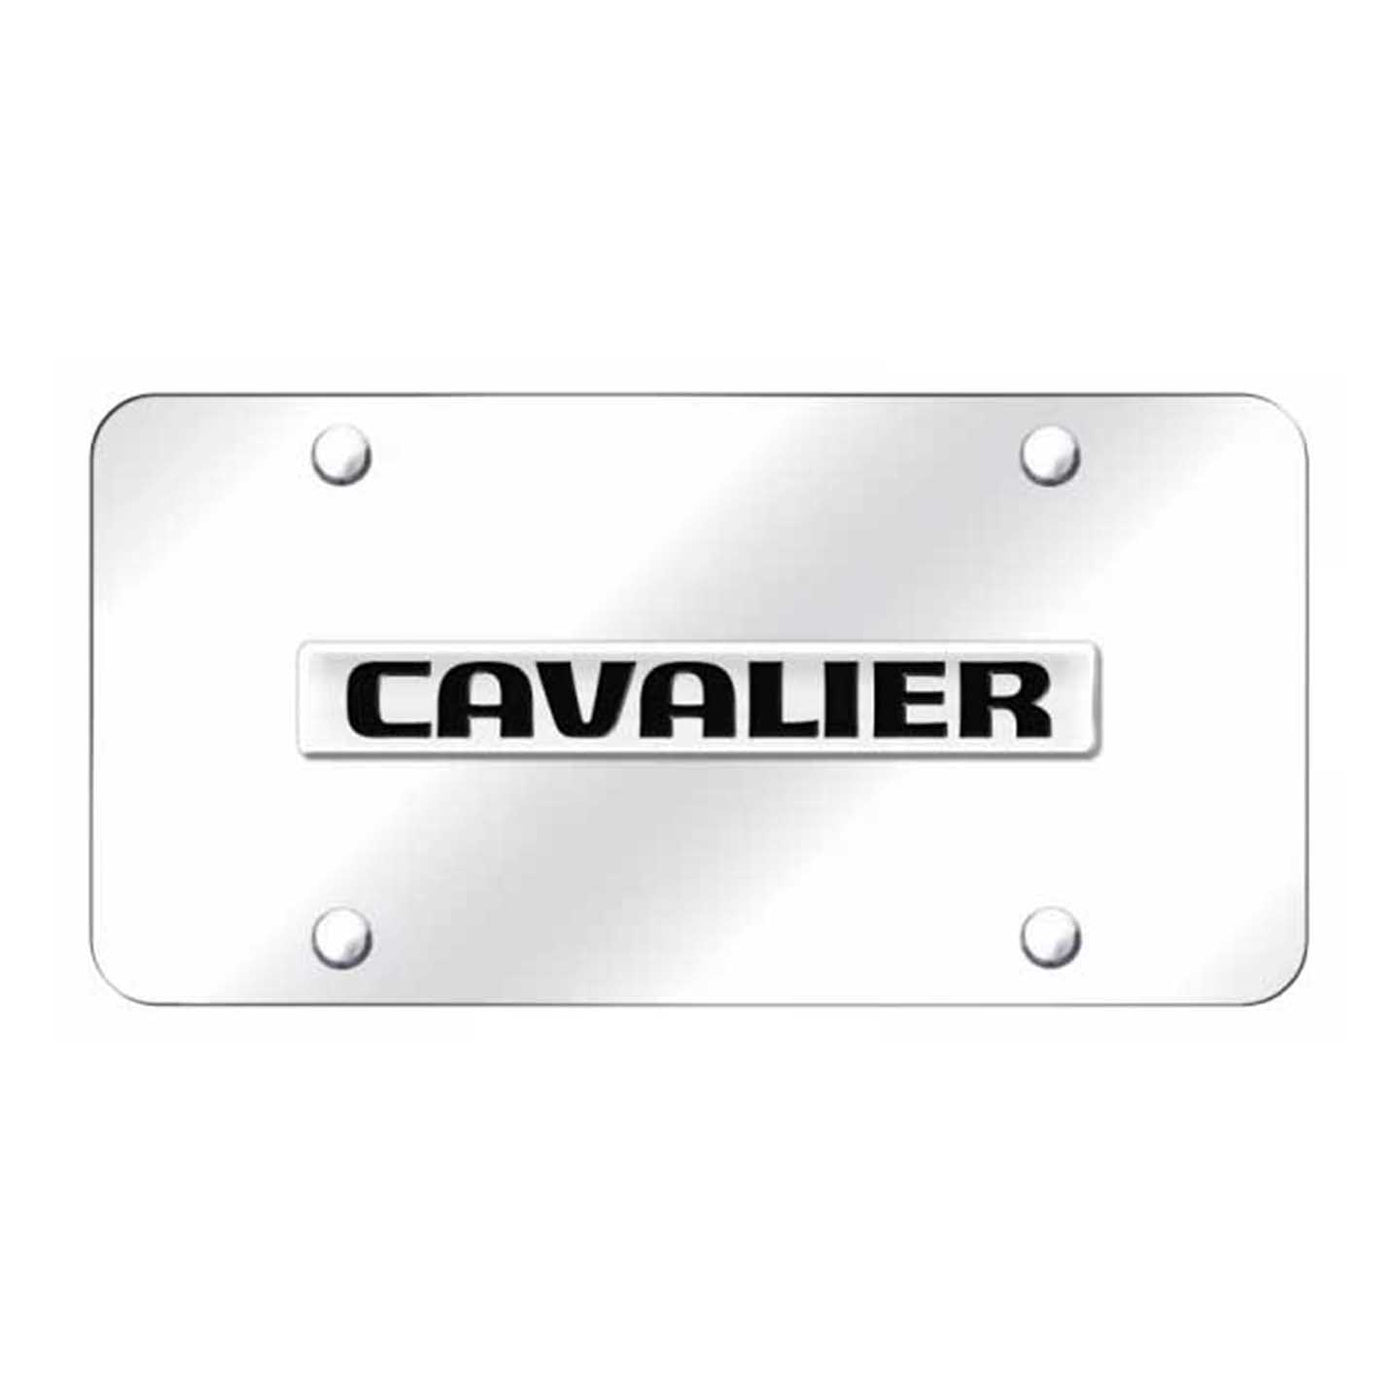 Cavalier Name License Plate - Chrome on Mirrored